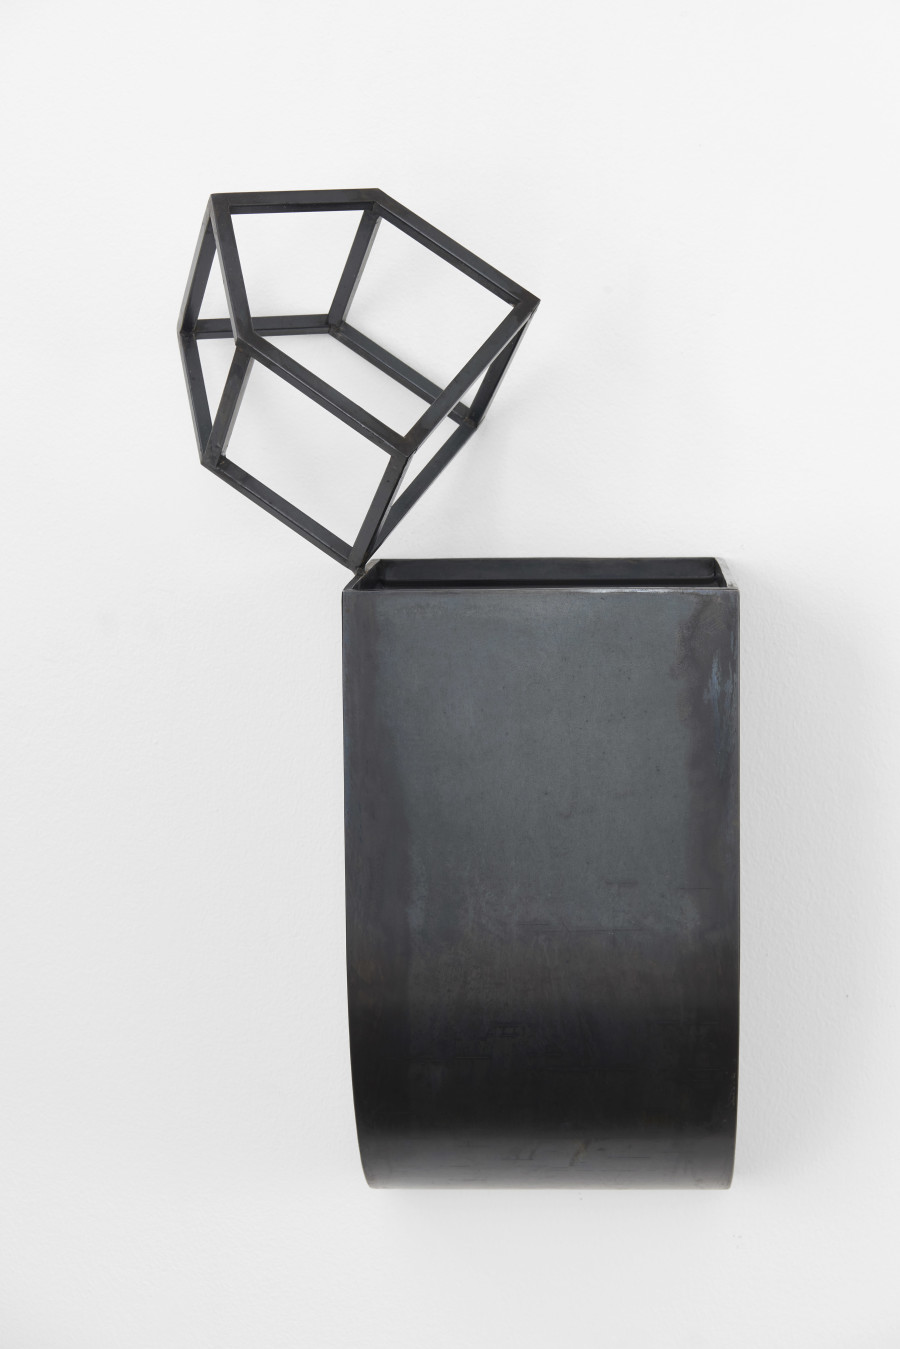 Untitled, 2023, Iron, artist’s oil-based mix, 54 x 27 x 19 cm, Unique. Photo: Philipp Hänger. Courtesy the artist and Wilde